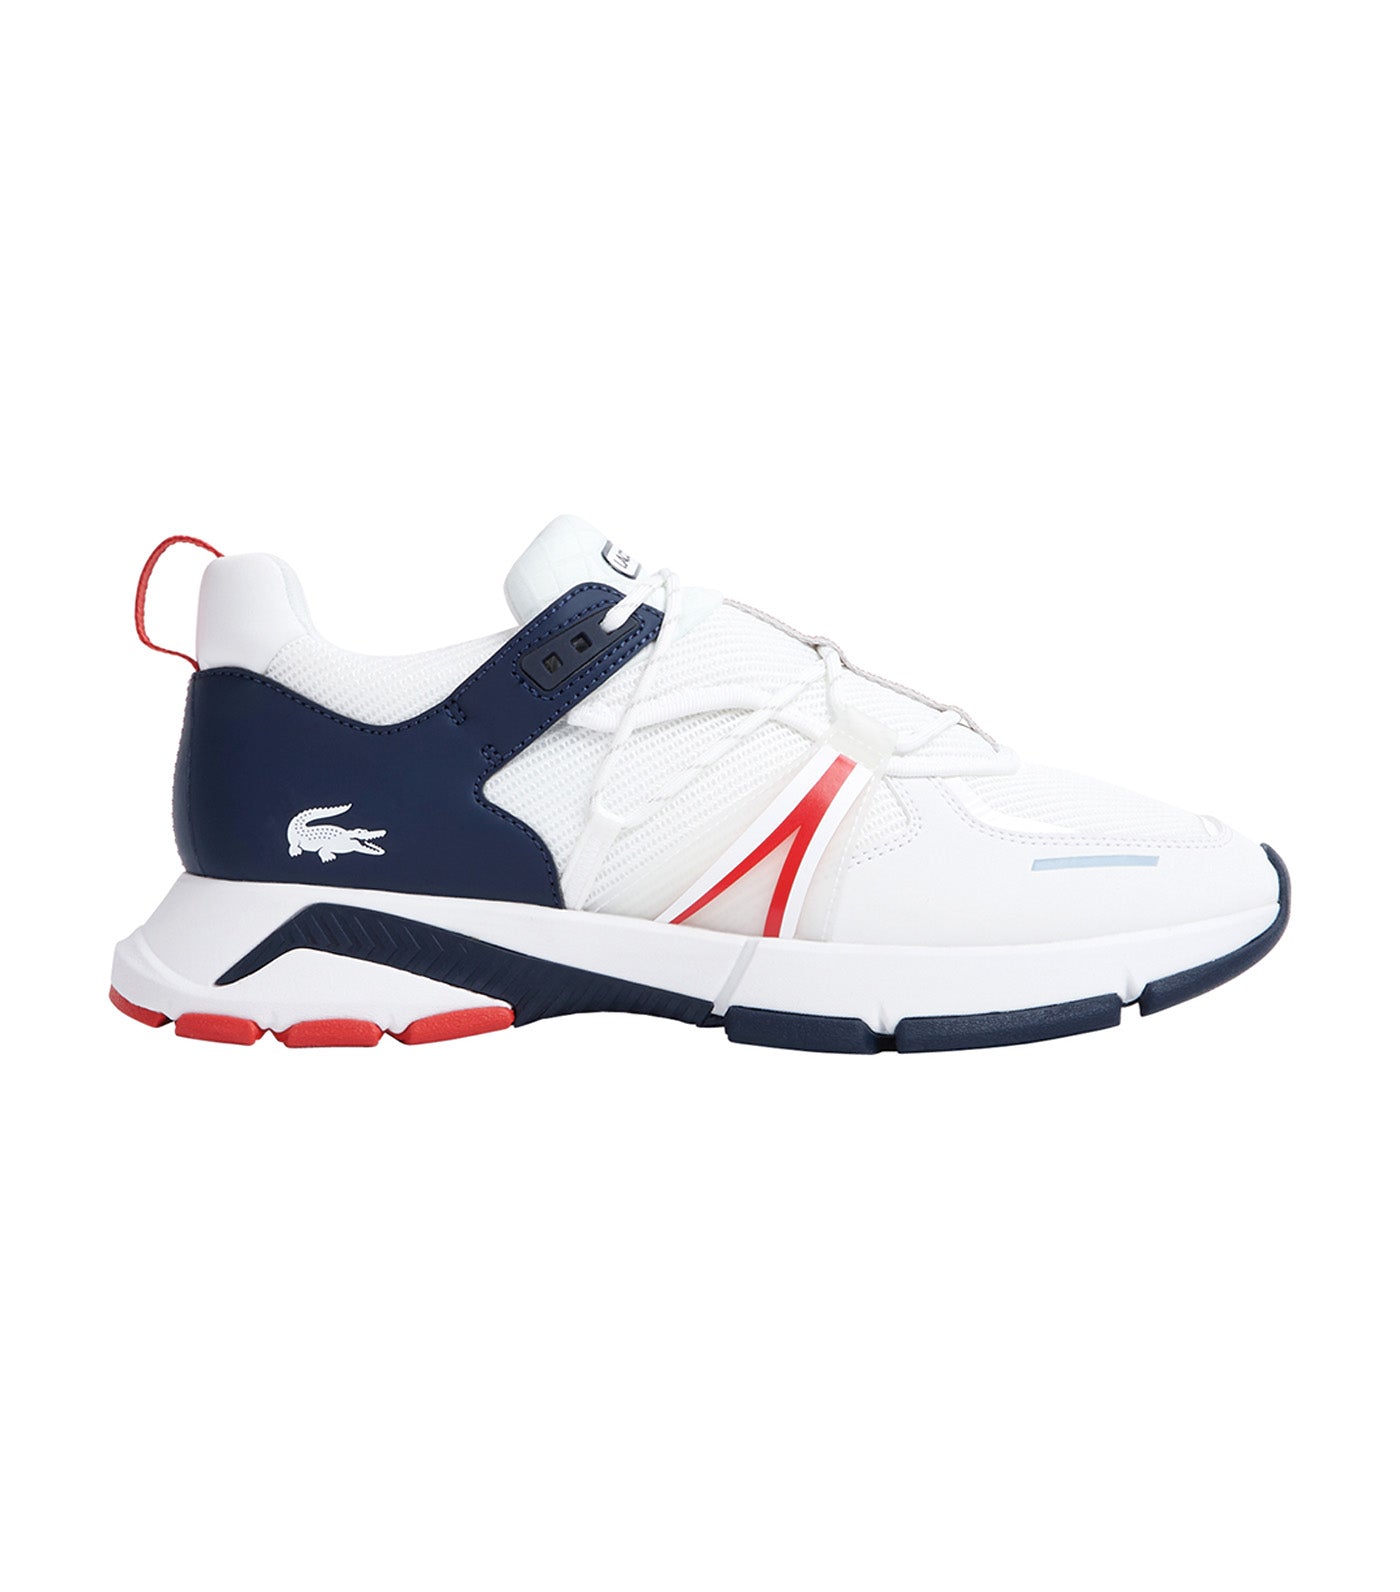 Men's L003 Textile Trainers White/Navy/Red